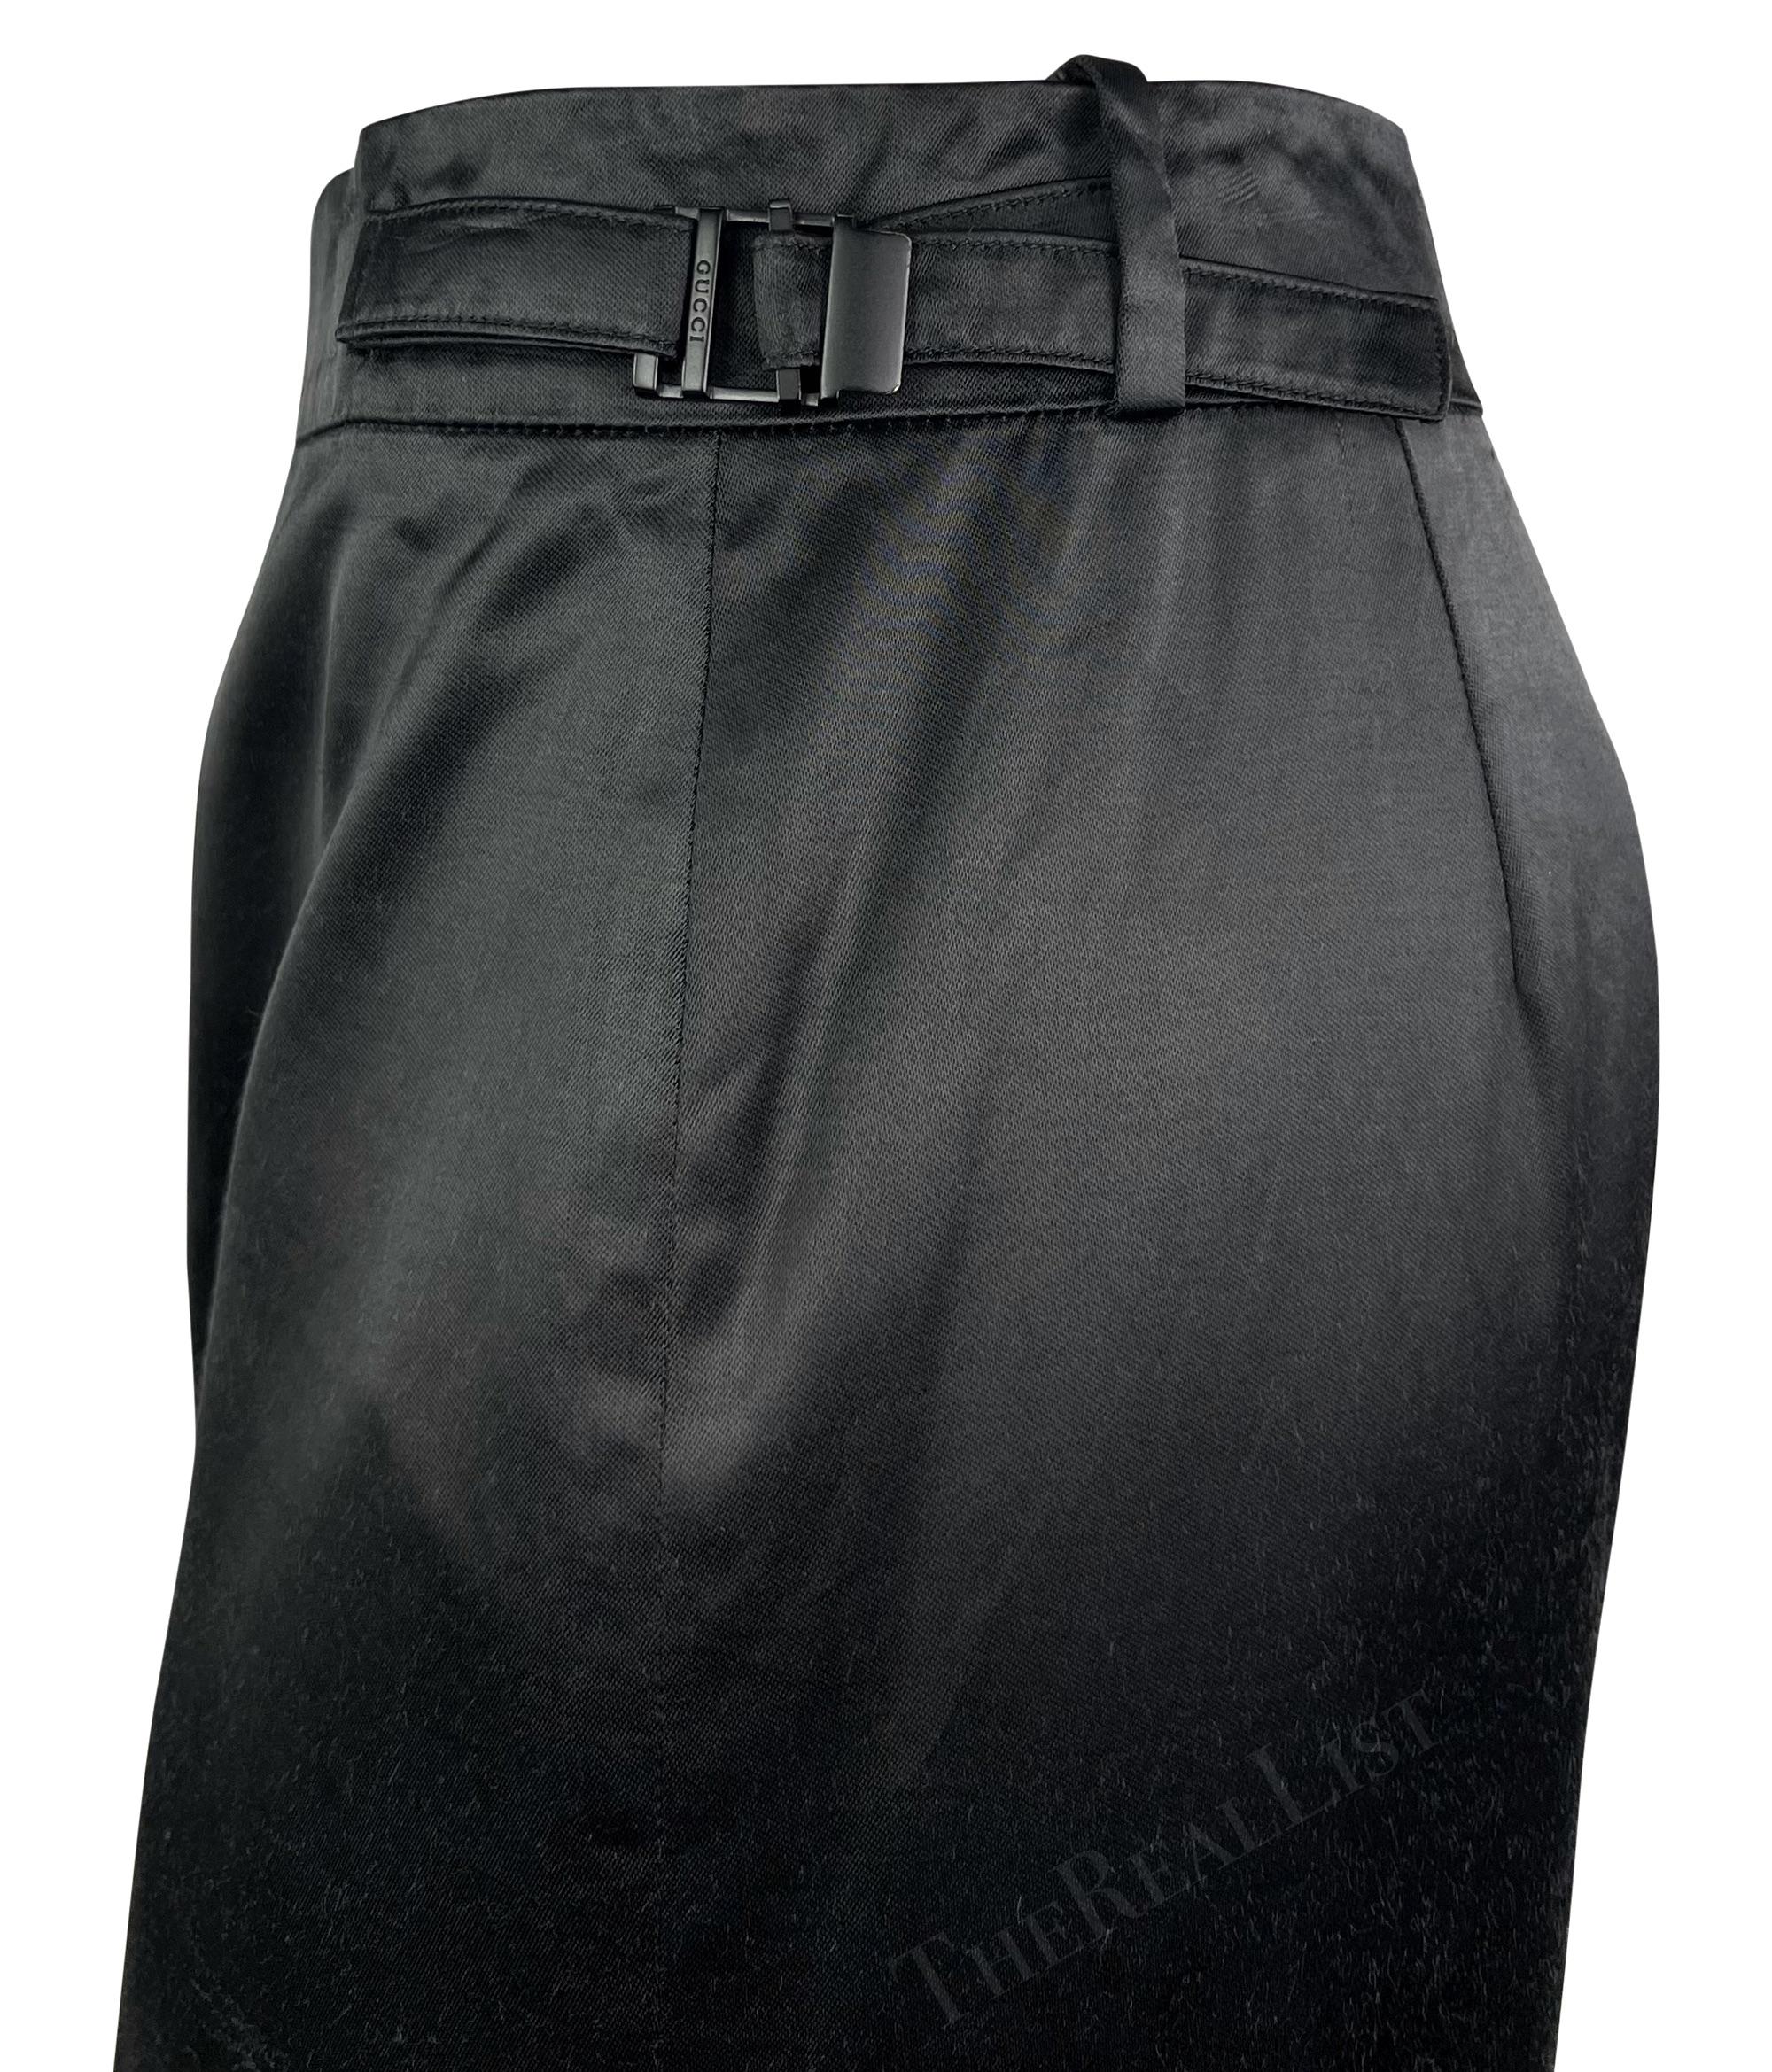 Women's S/S 2001 Gucci by Tom Ford Black Satin Belted Runway Pencil Skirt  For Sale